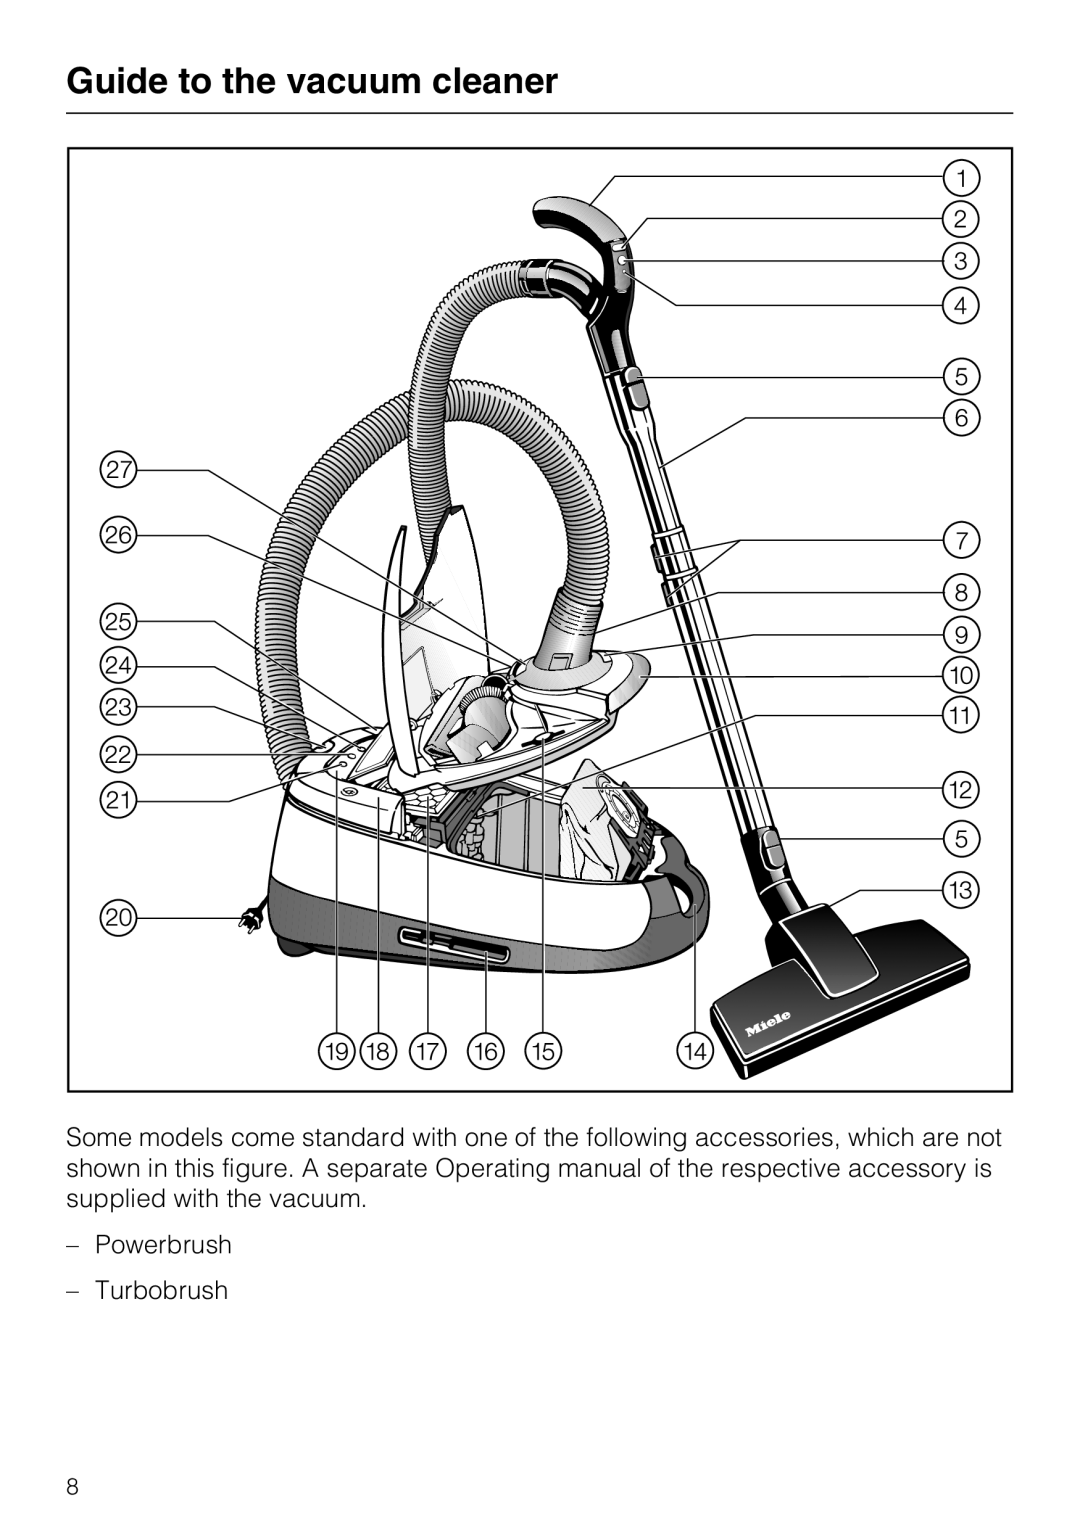 Miele S 5001 manual Guide to the vacuum cleaner, Powerbrush -Turbobrush 